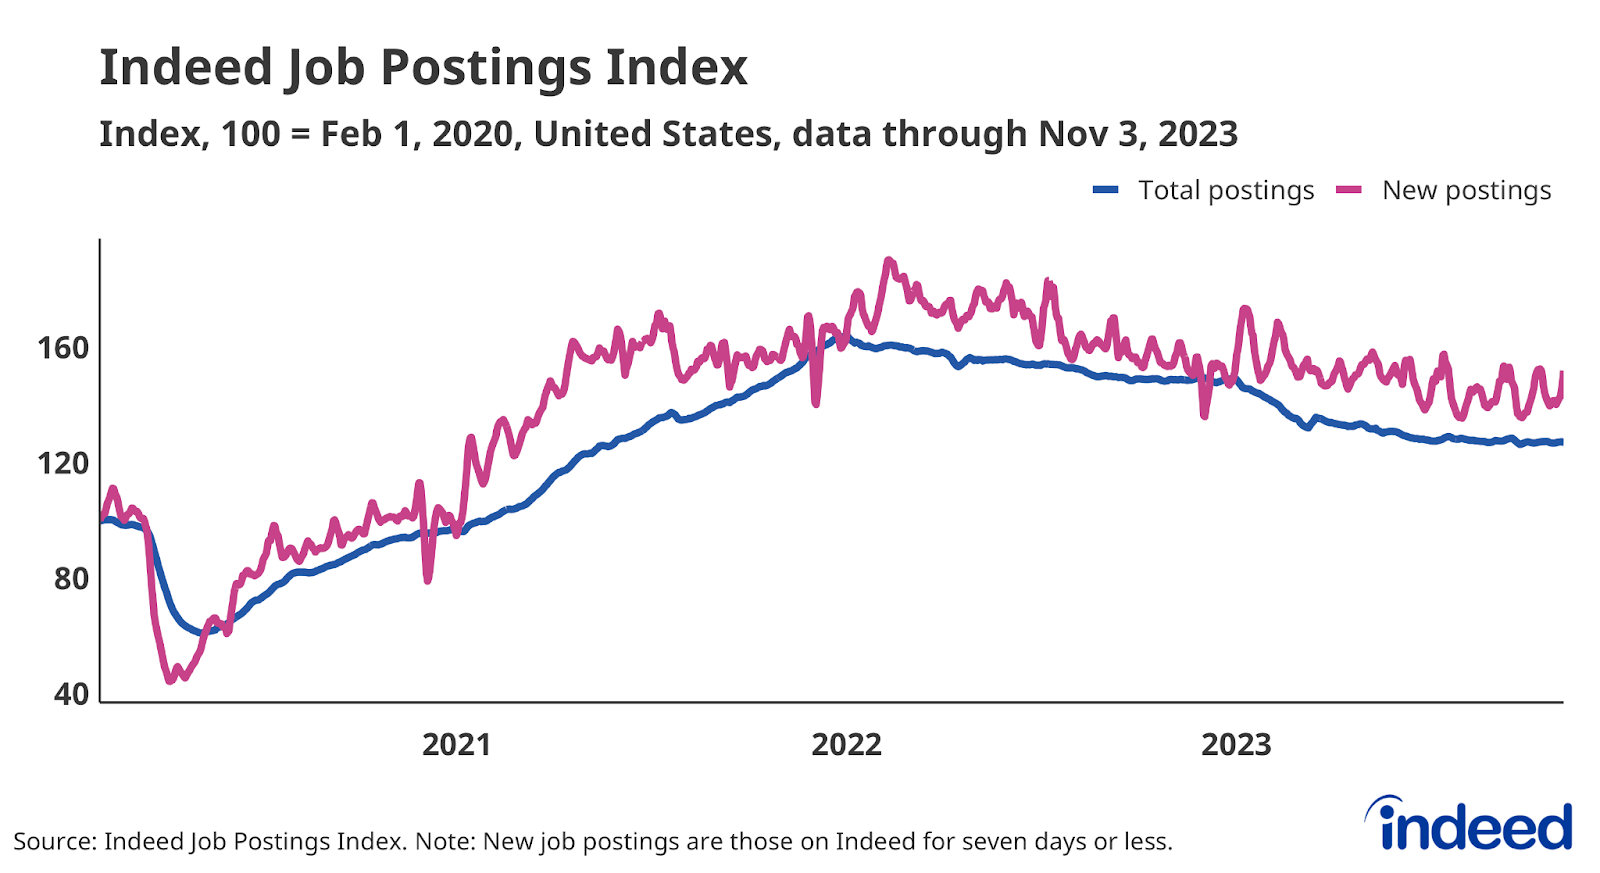 Line graph titled “Indeed Job Postings Index” with a vertical axis spanning from 40 to 160. The index is set so the daily number of job postings on February 1, 2020, is equal to 100. The index declined for much of 2022 and early 2023, but its descent has moderated in recent months.